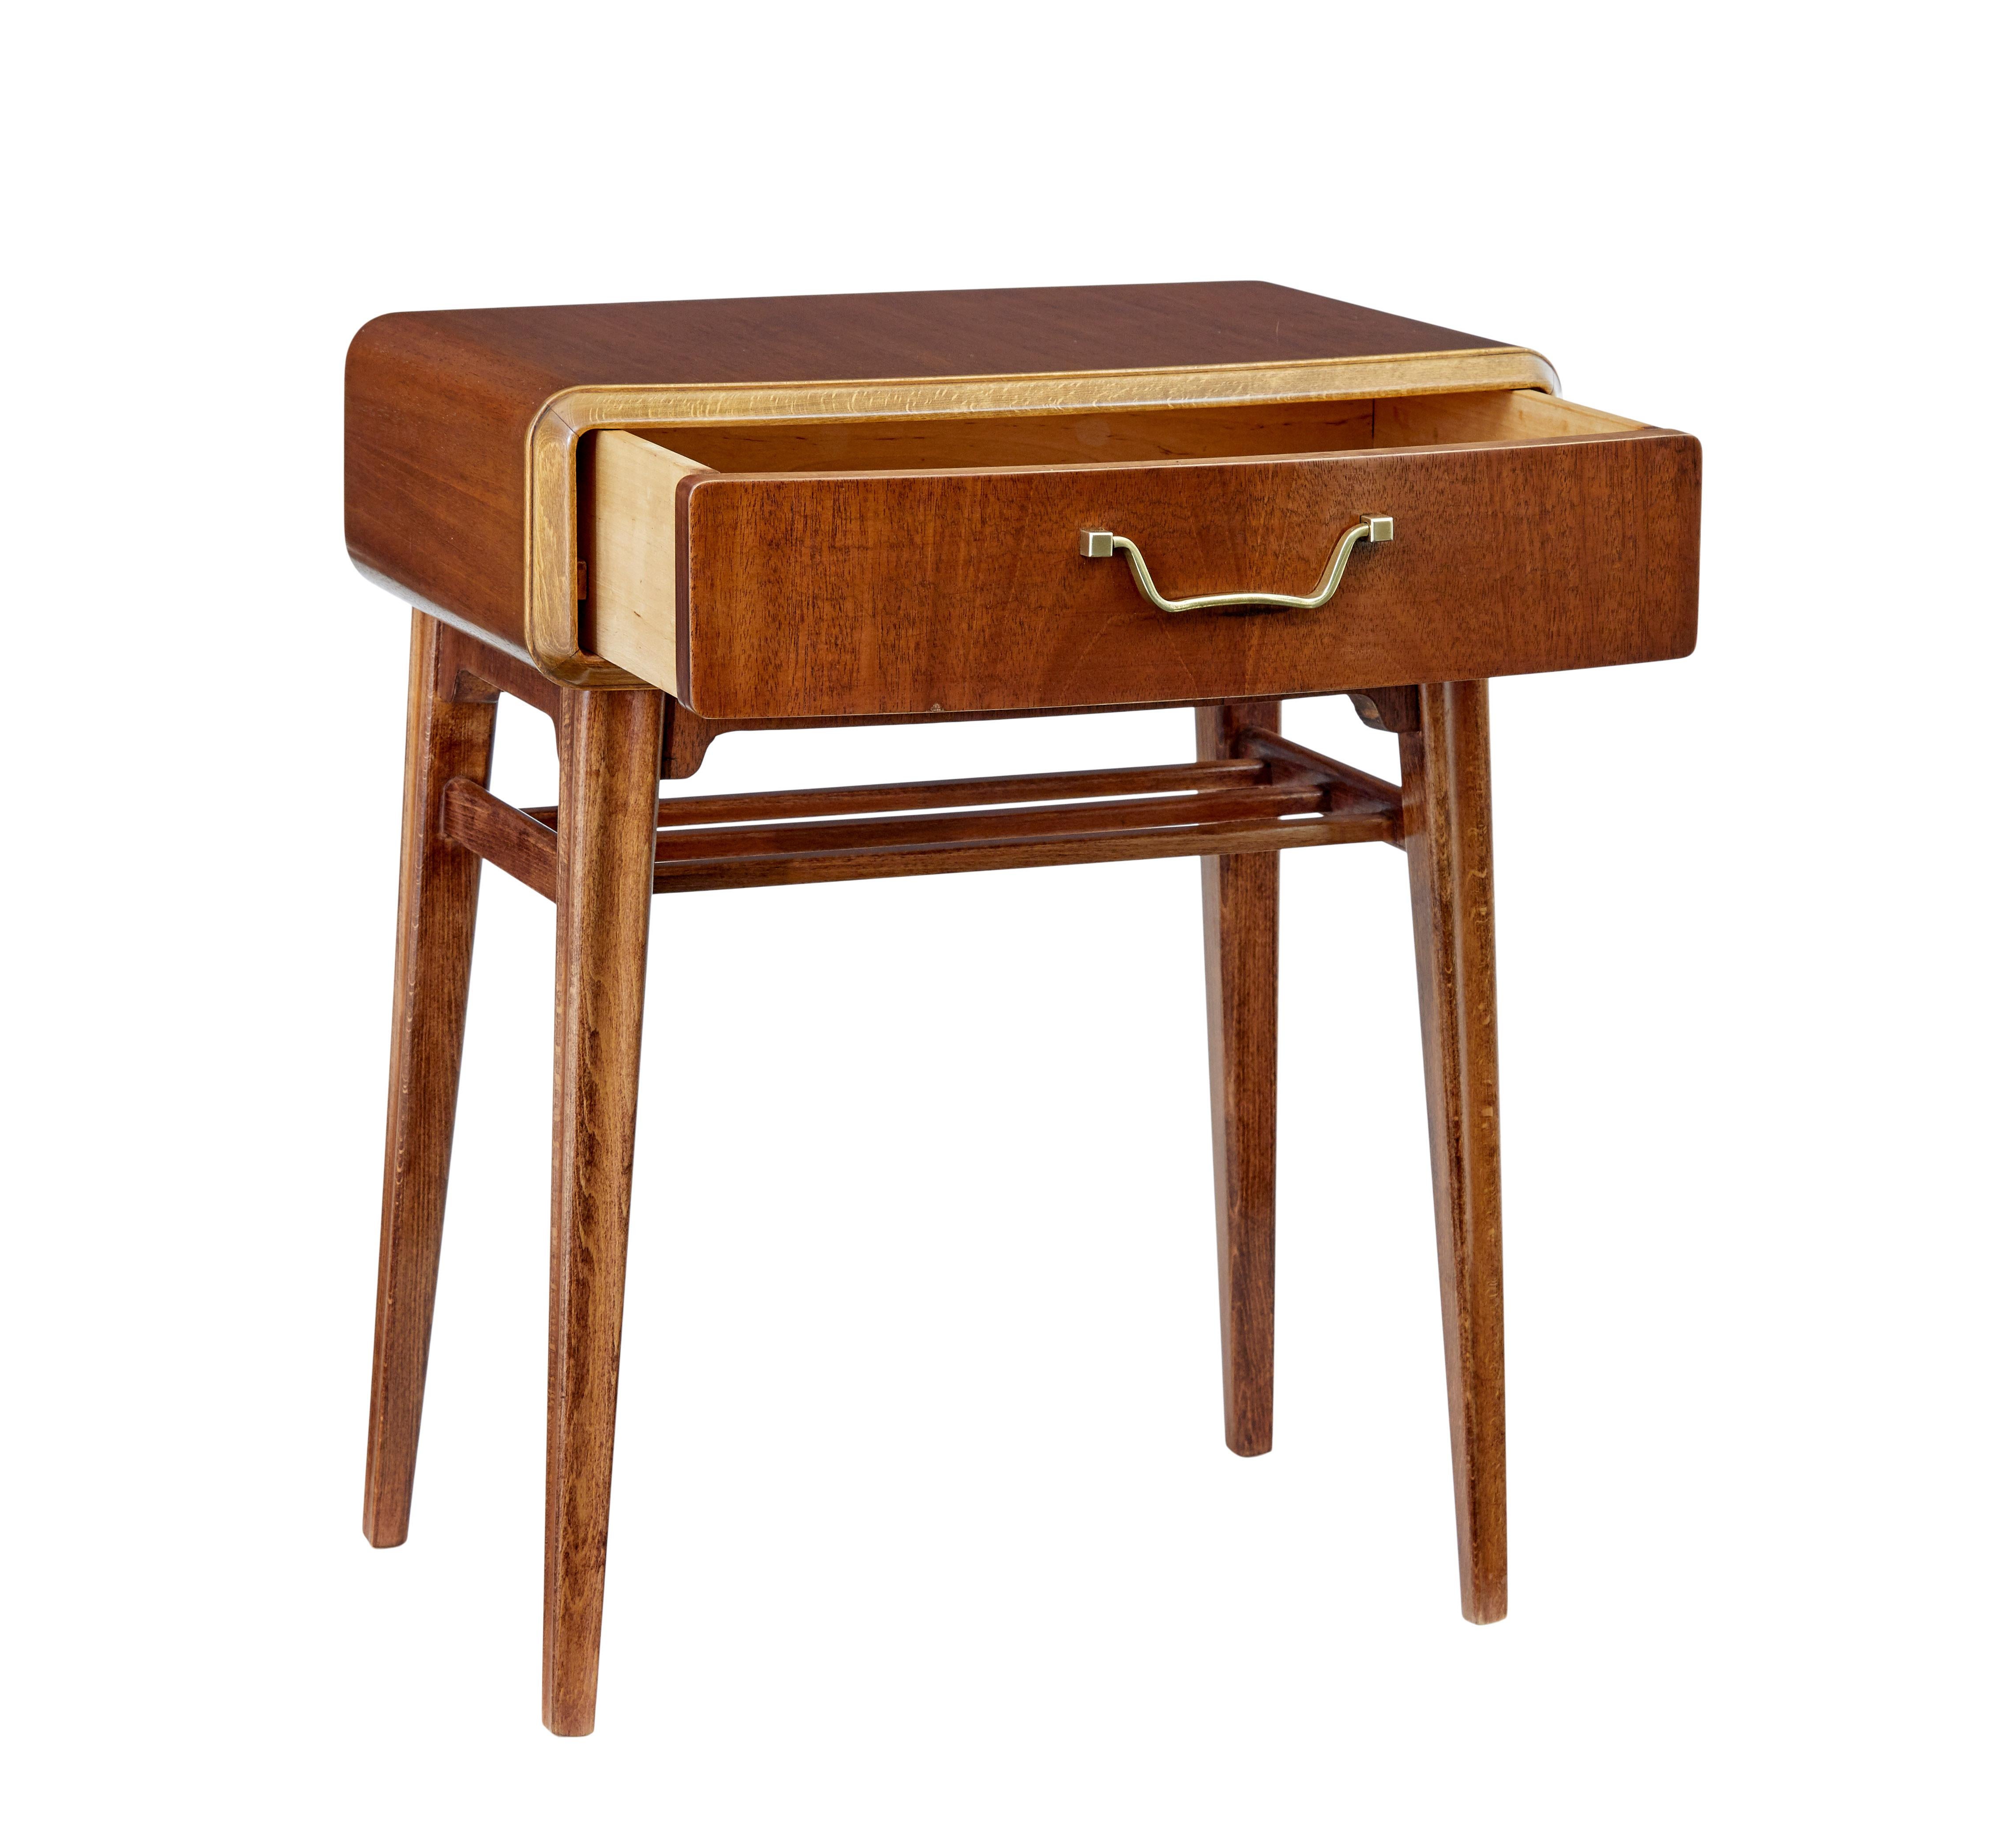 Mid-20th century mahogany bedside table by Bodafors, circa 1950.

Designed by Swedish designer Axel Larsson for Swedish company Bodafors, with makers label on the inside of the drawer.

Shaped flowing lines with single drawer to the front,